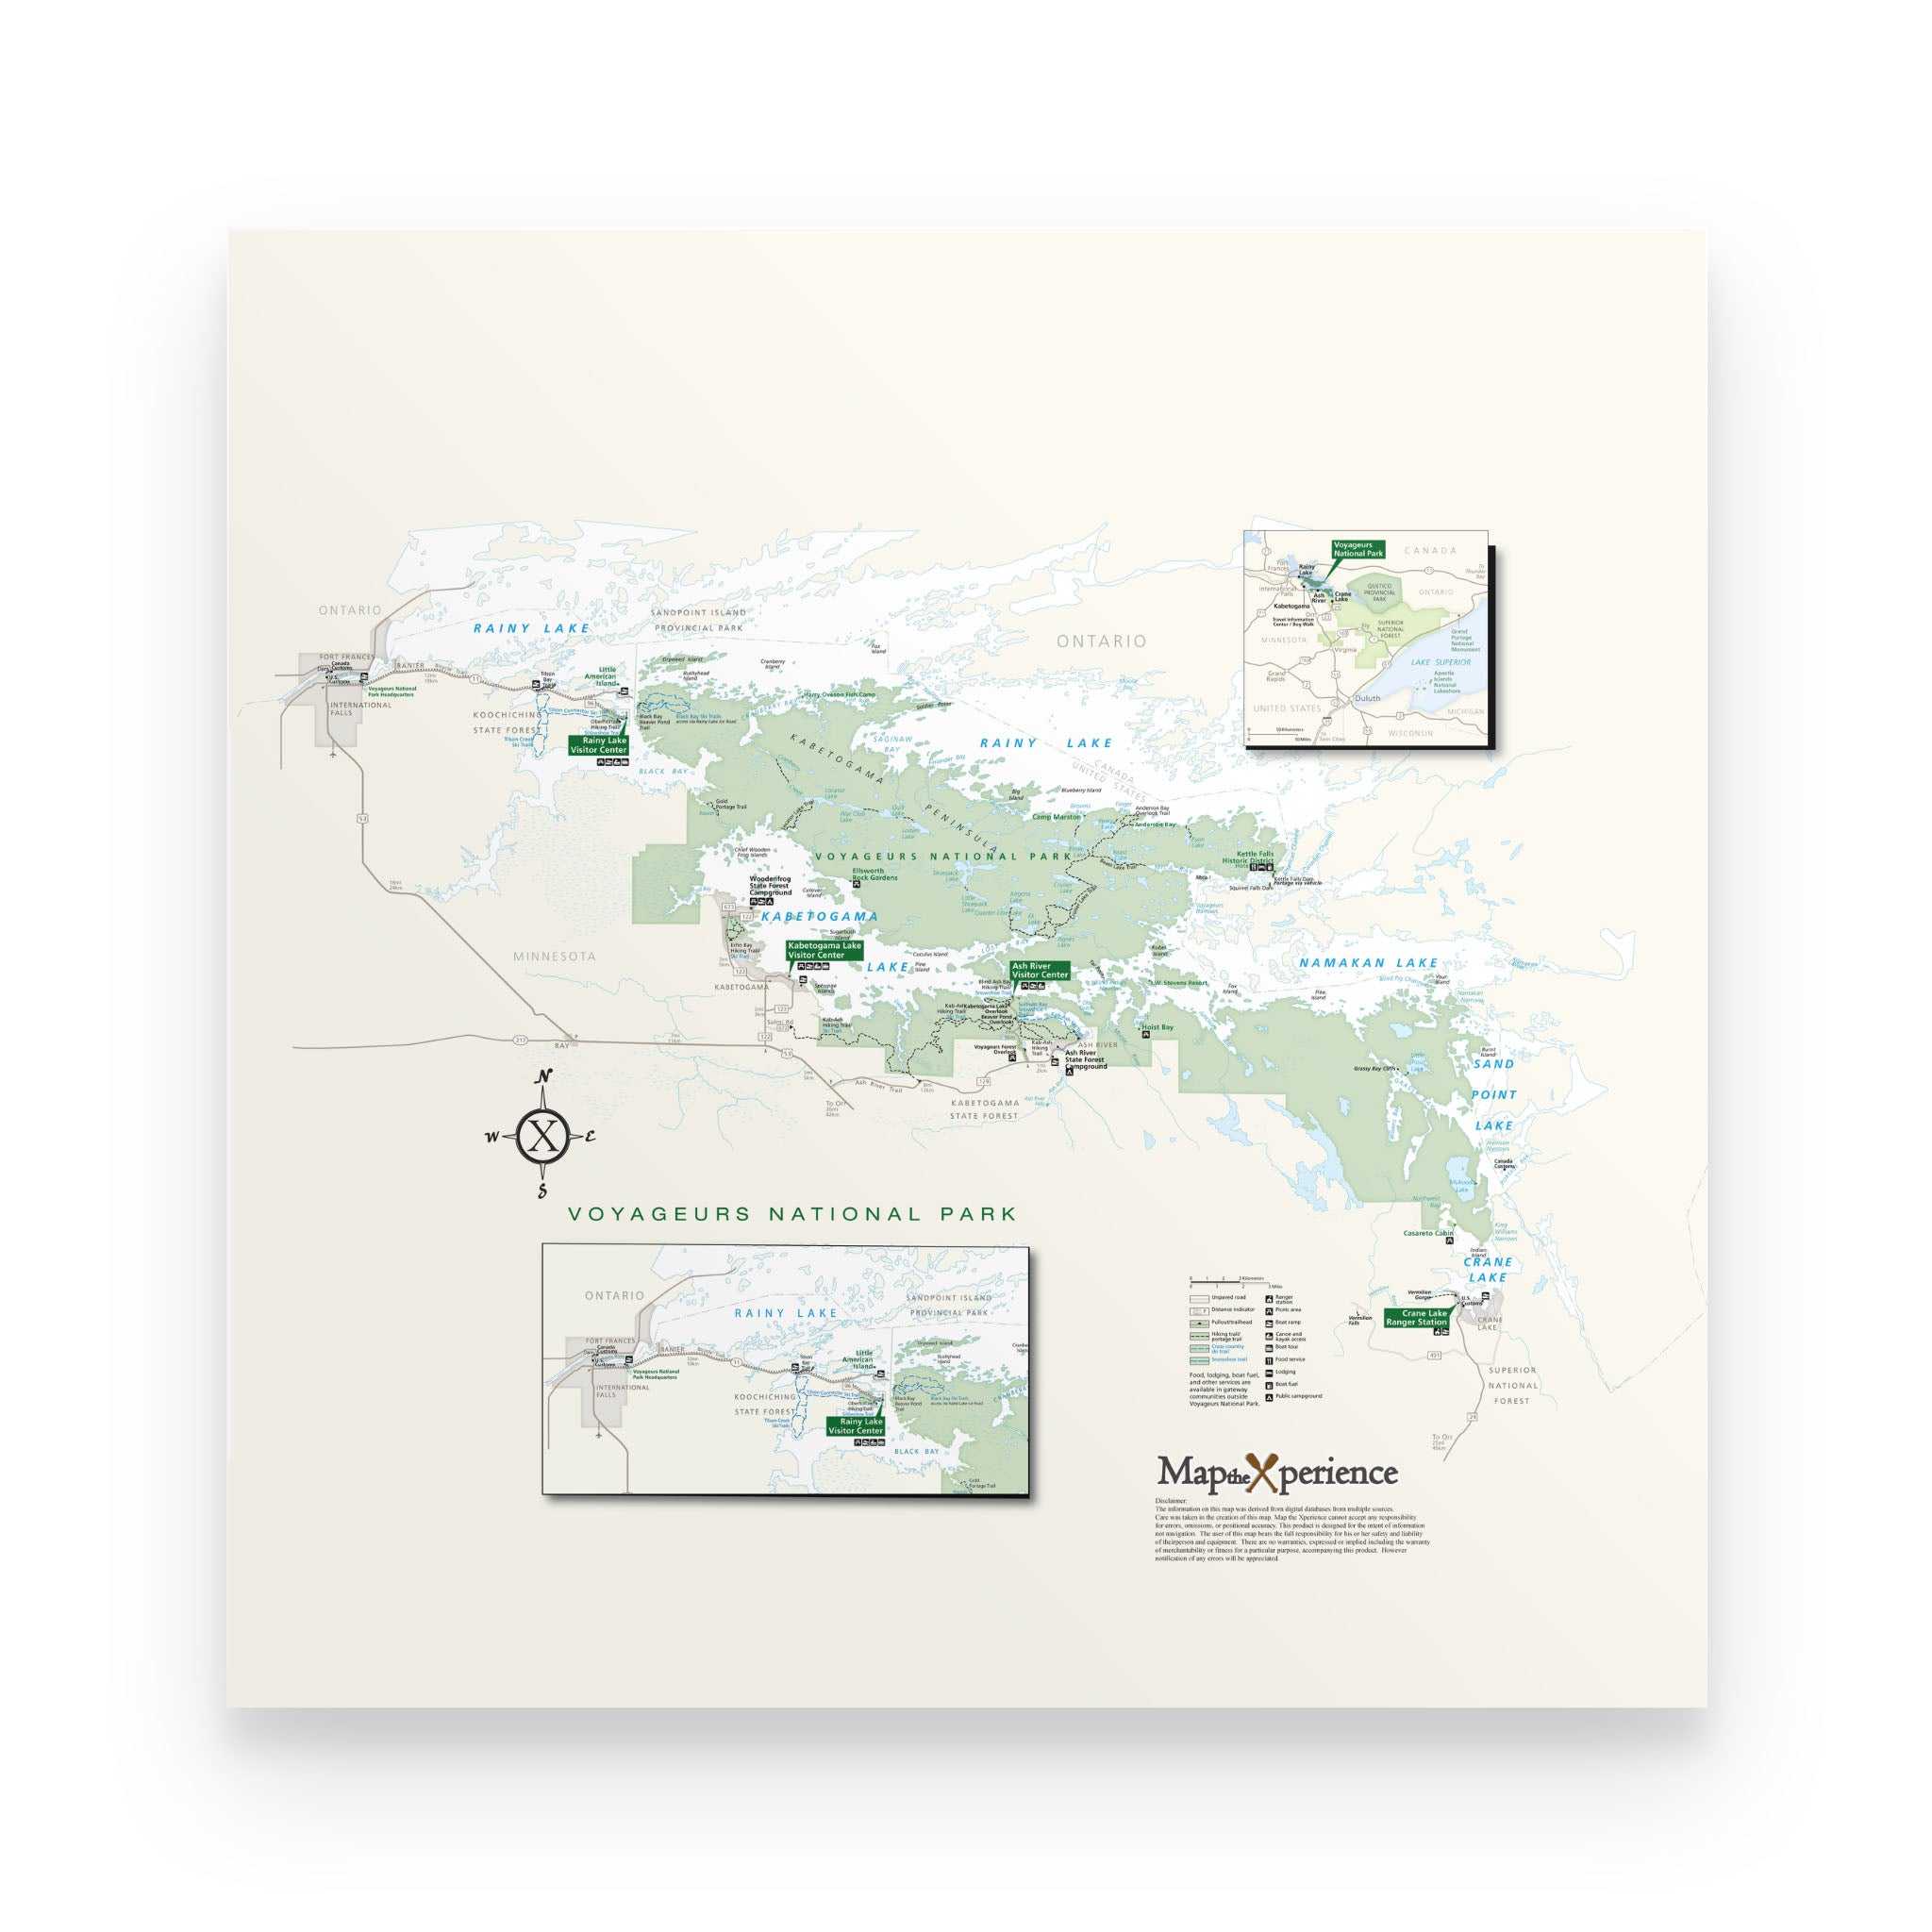 Voyageurs National Park Map Poster | Free Mobile Map